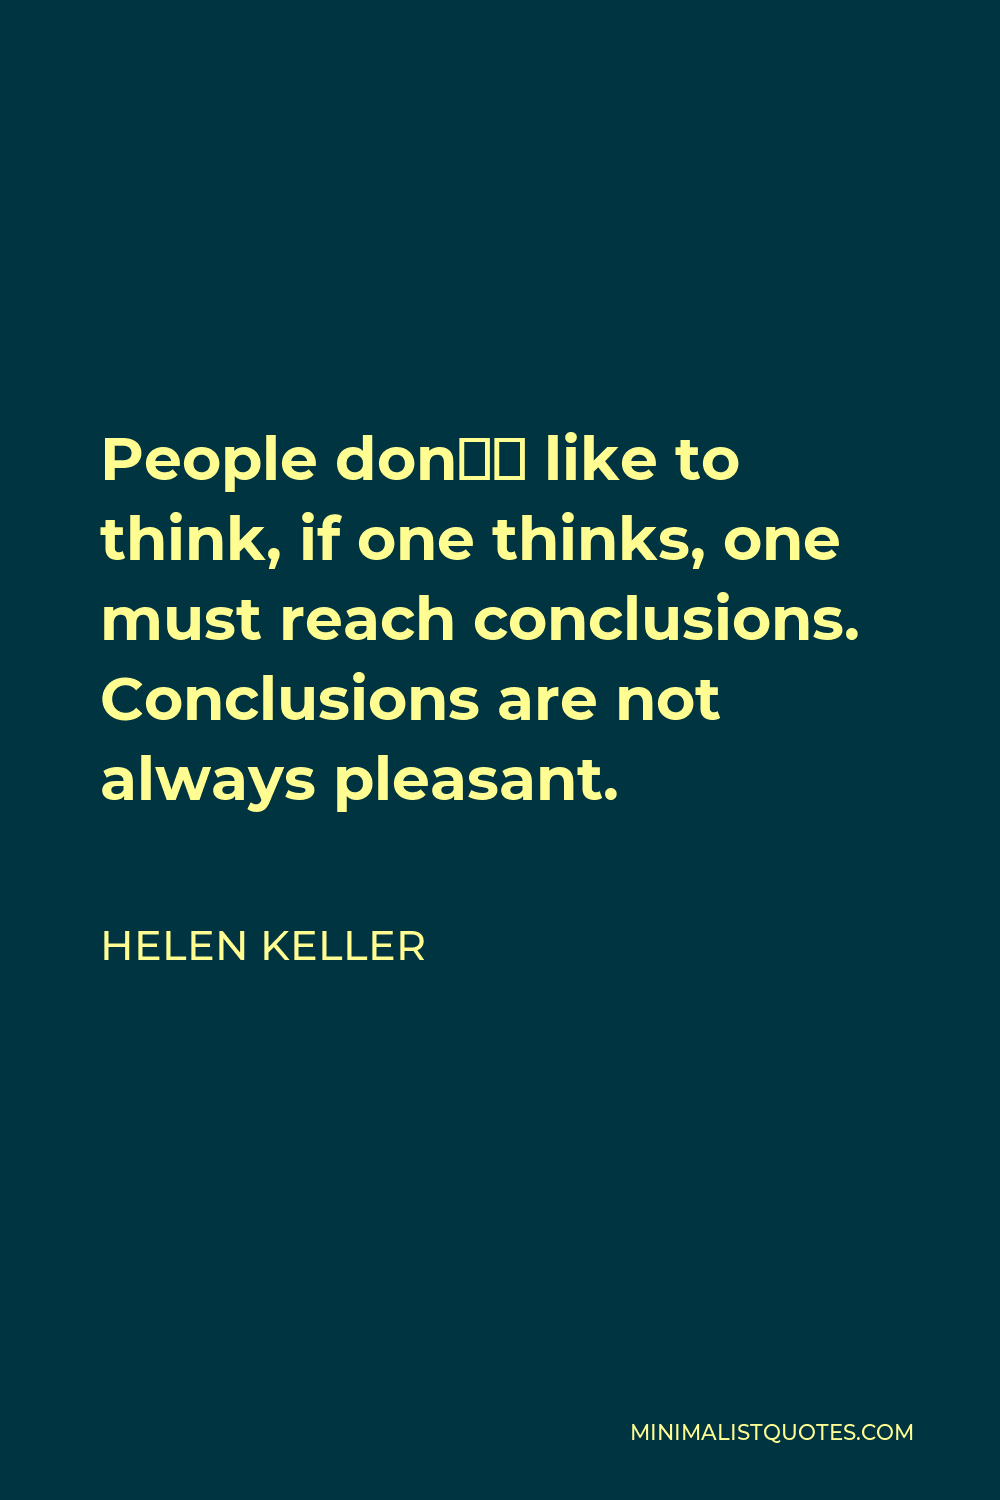 Helen Keller Quote - People don’t like to think, if one thinks, one must reach conclusions. Conclusions are not always pleasant.